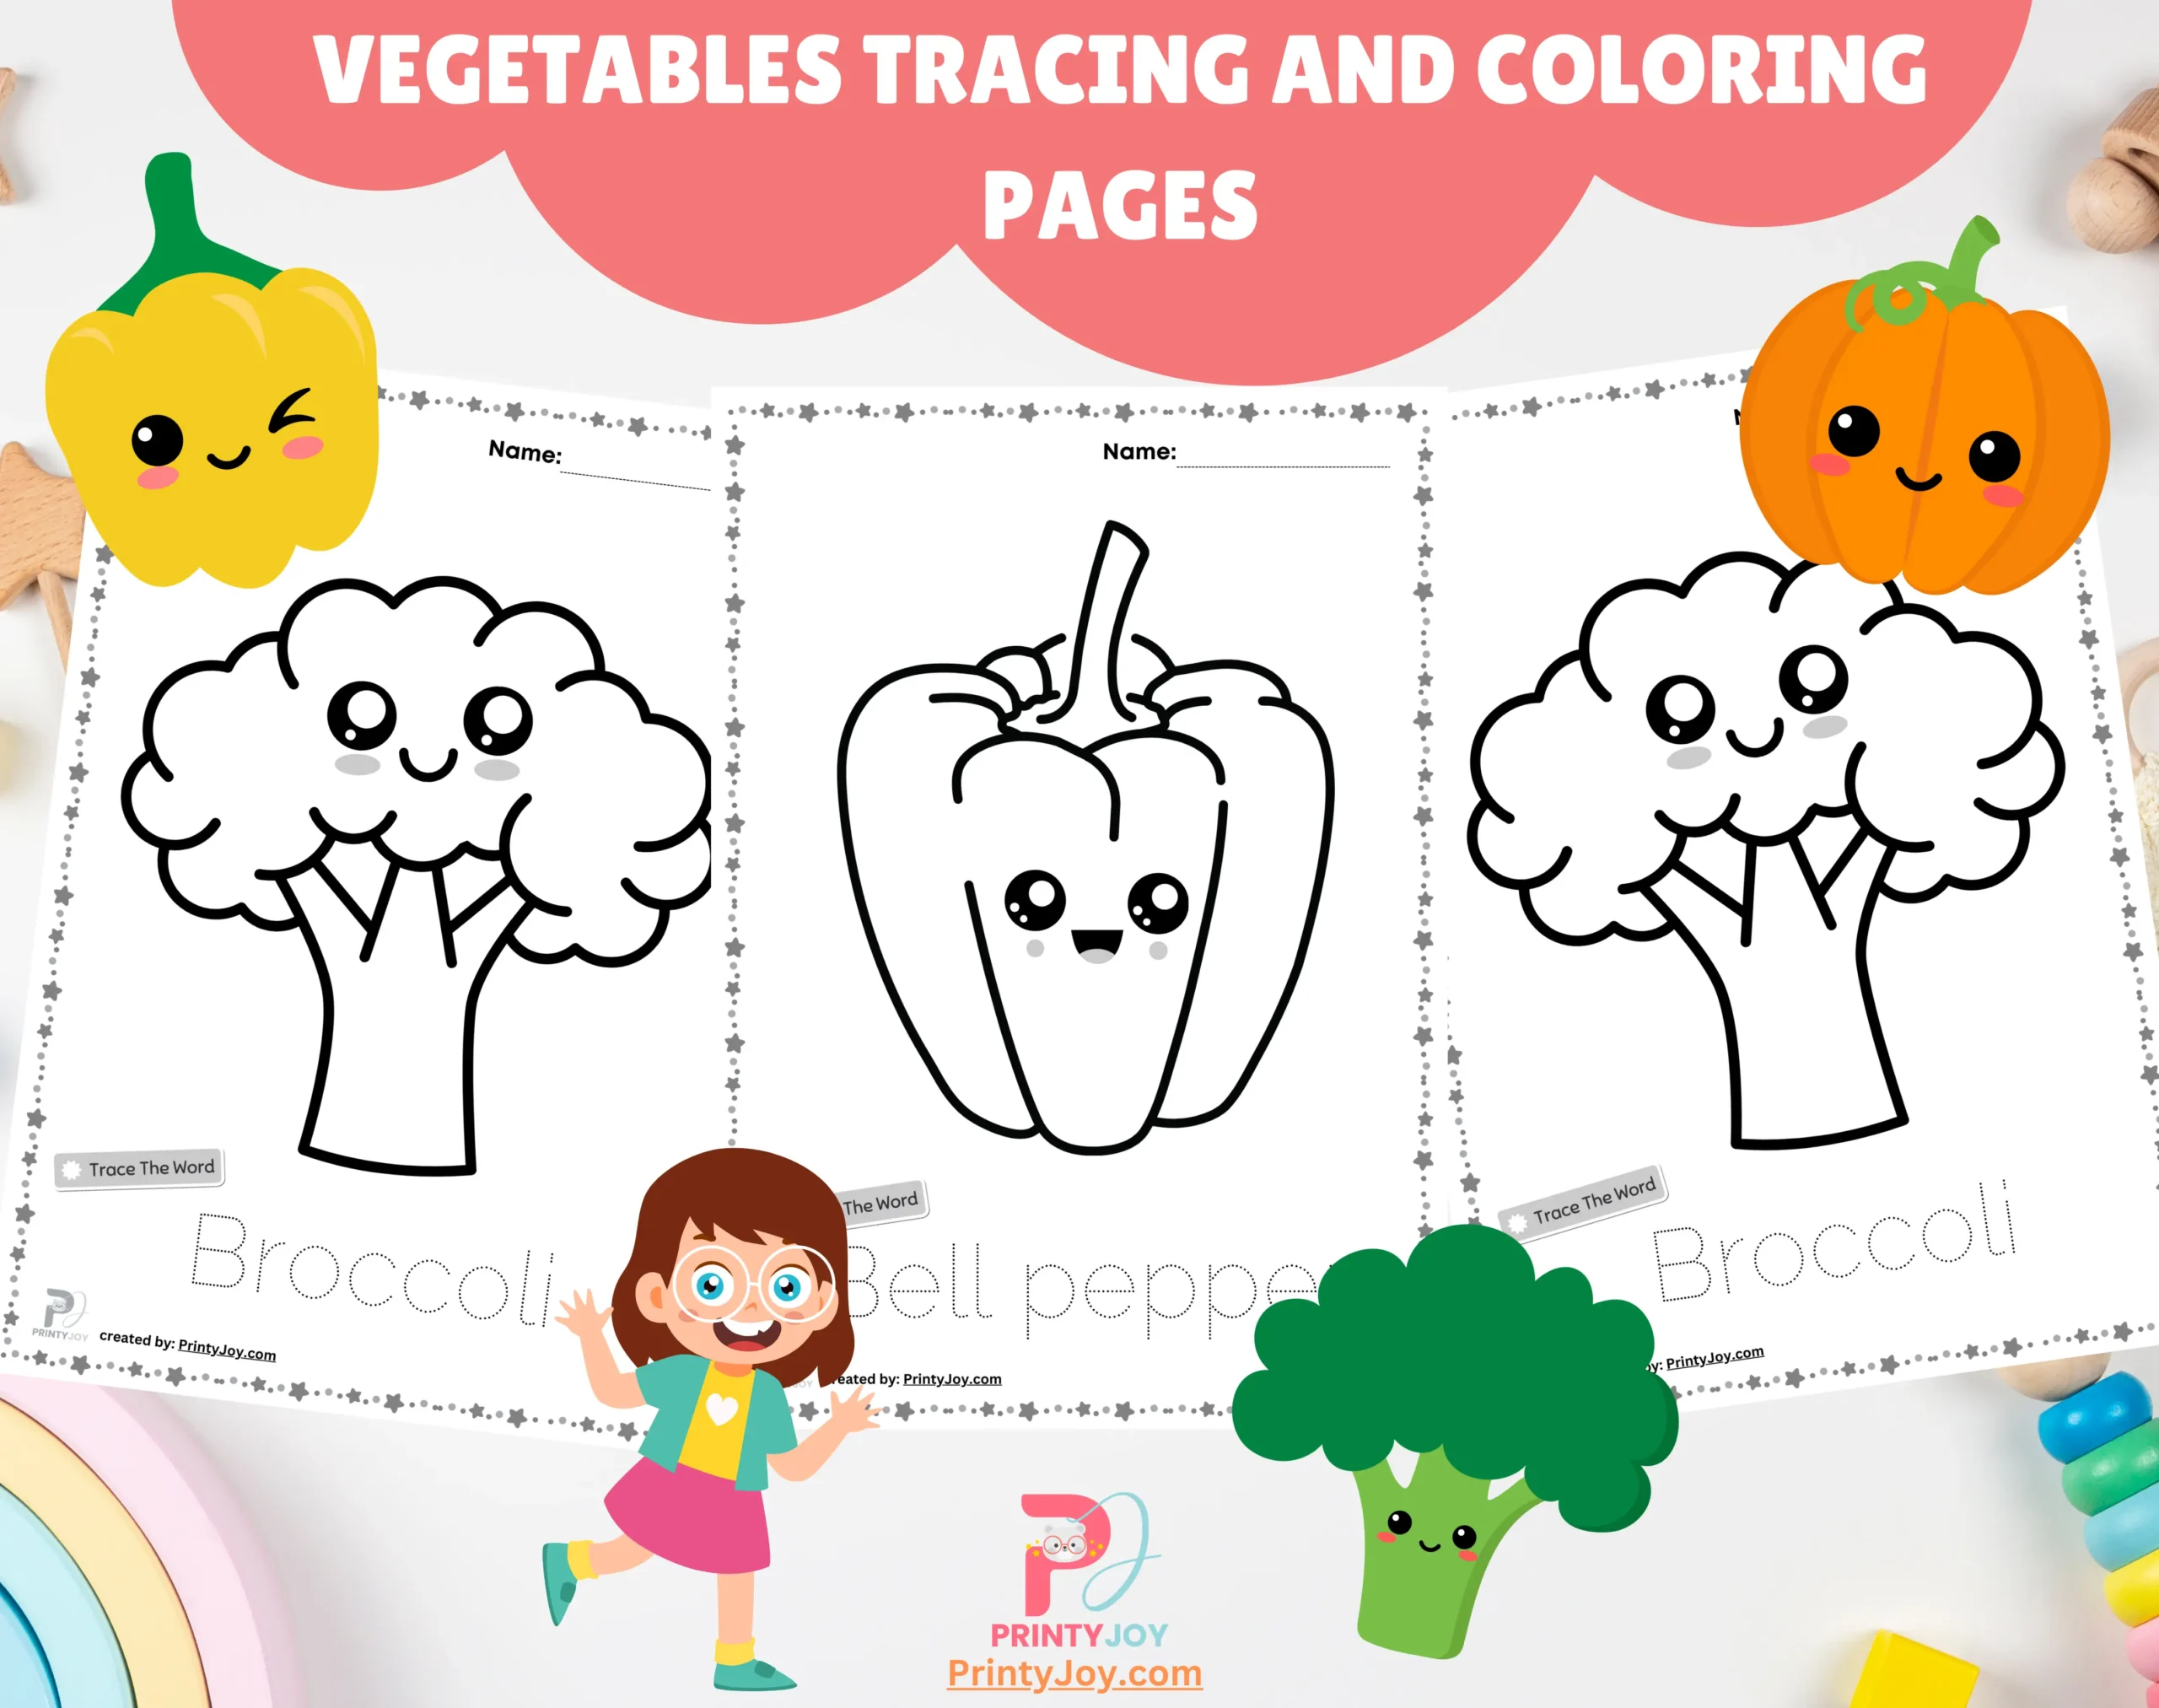 Vegetables Tracing And Coloring Pages